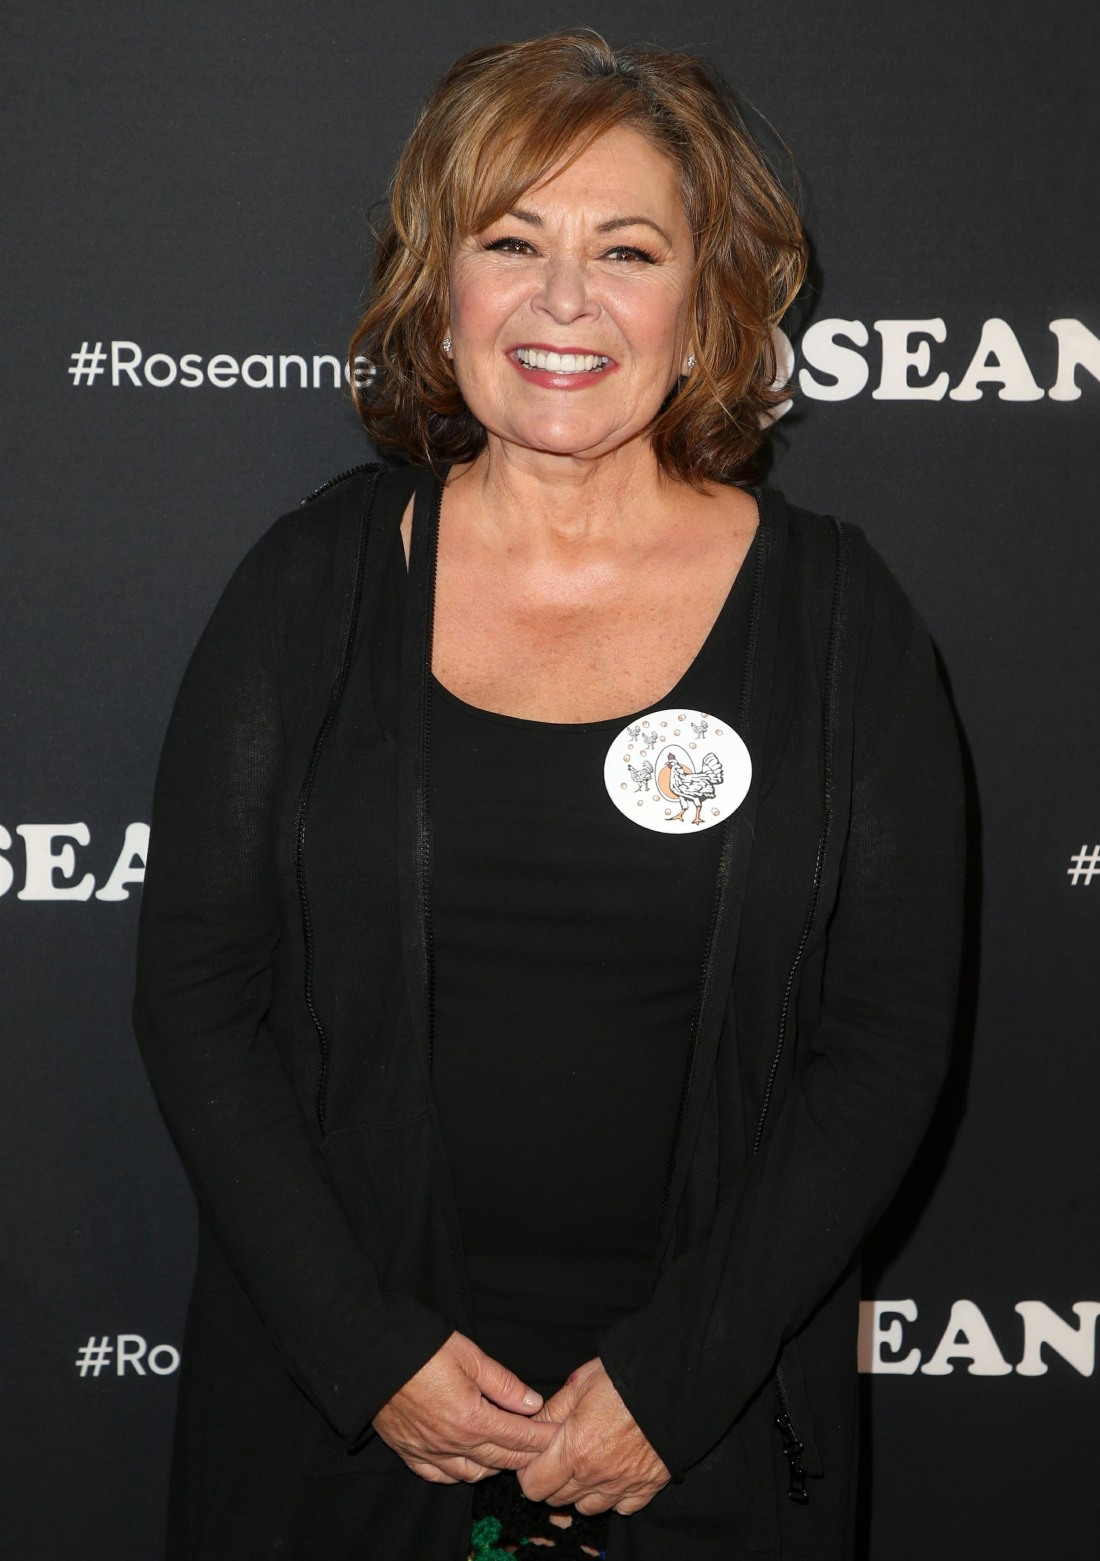 The "Roseanne" premiere event red carpet arrivals